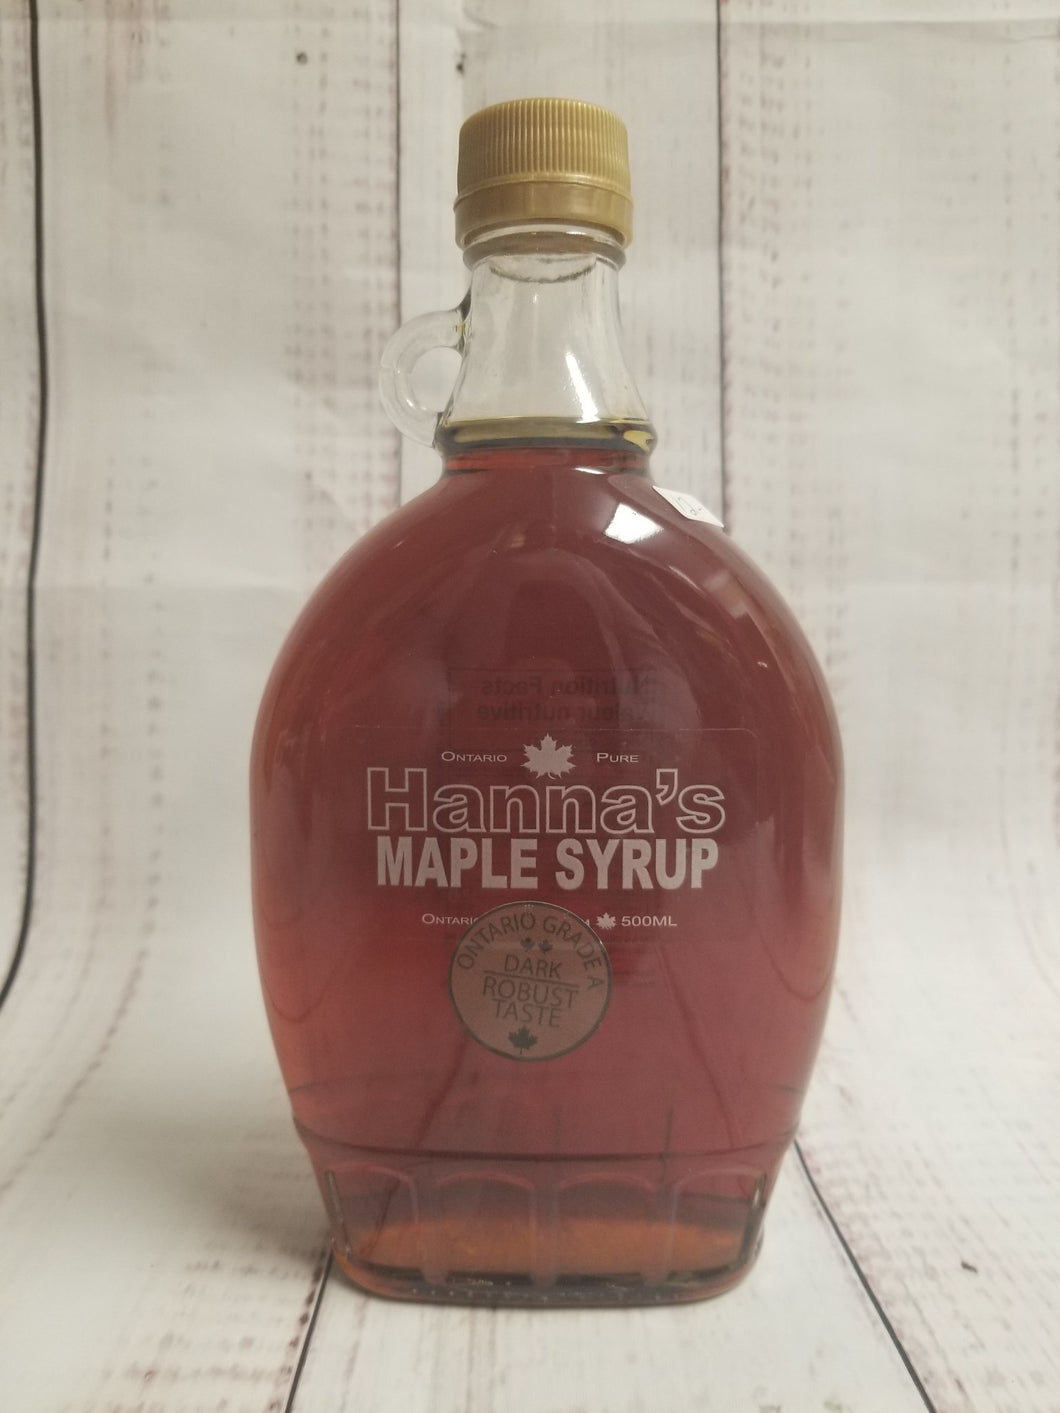 Hanna's 500 ml Maple syrup - My Other Child / Blooms n' Rooms